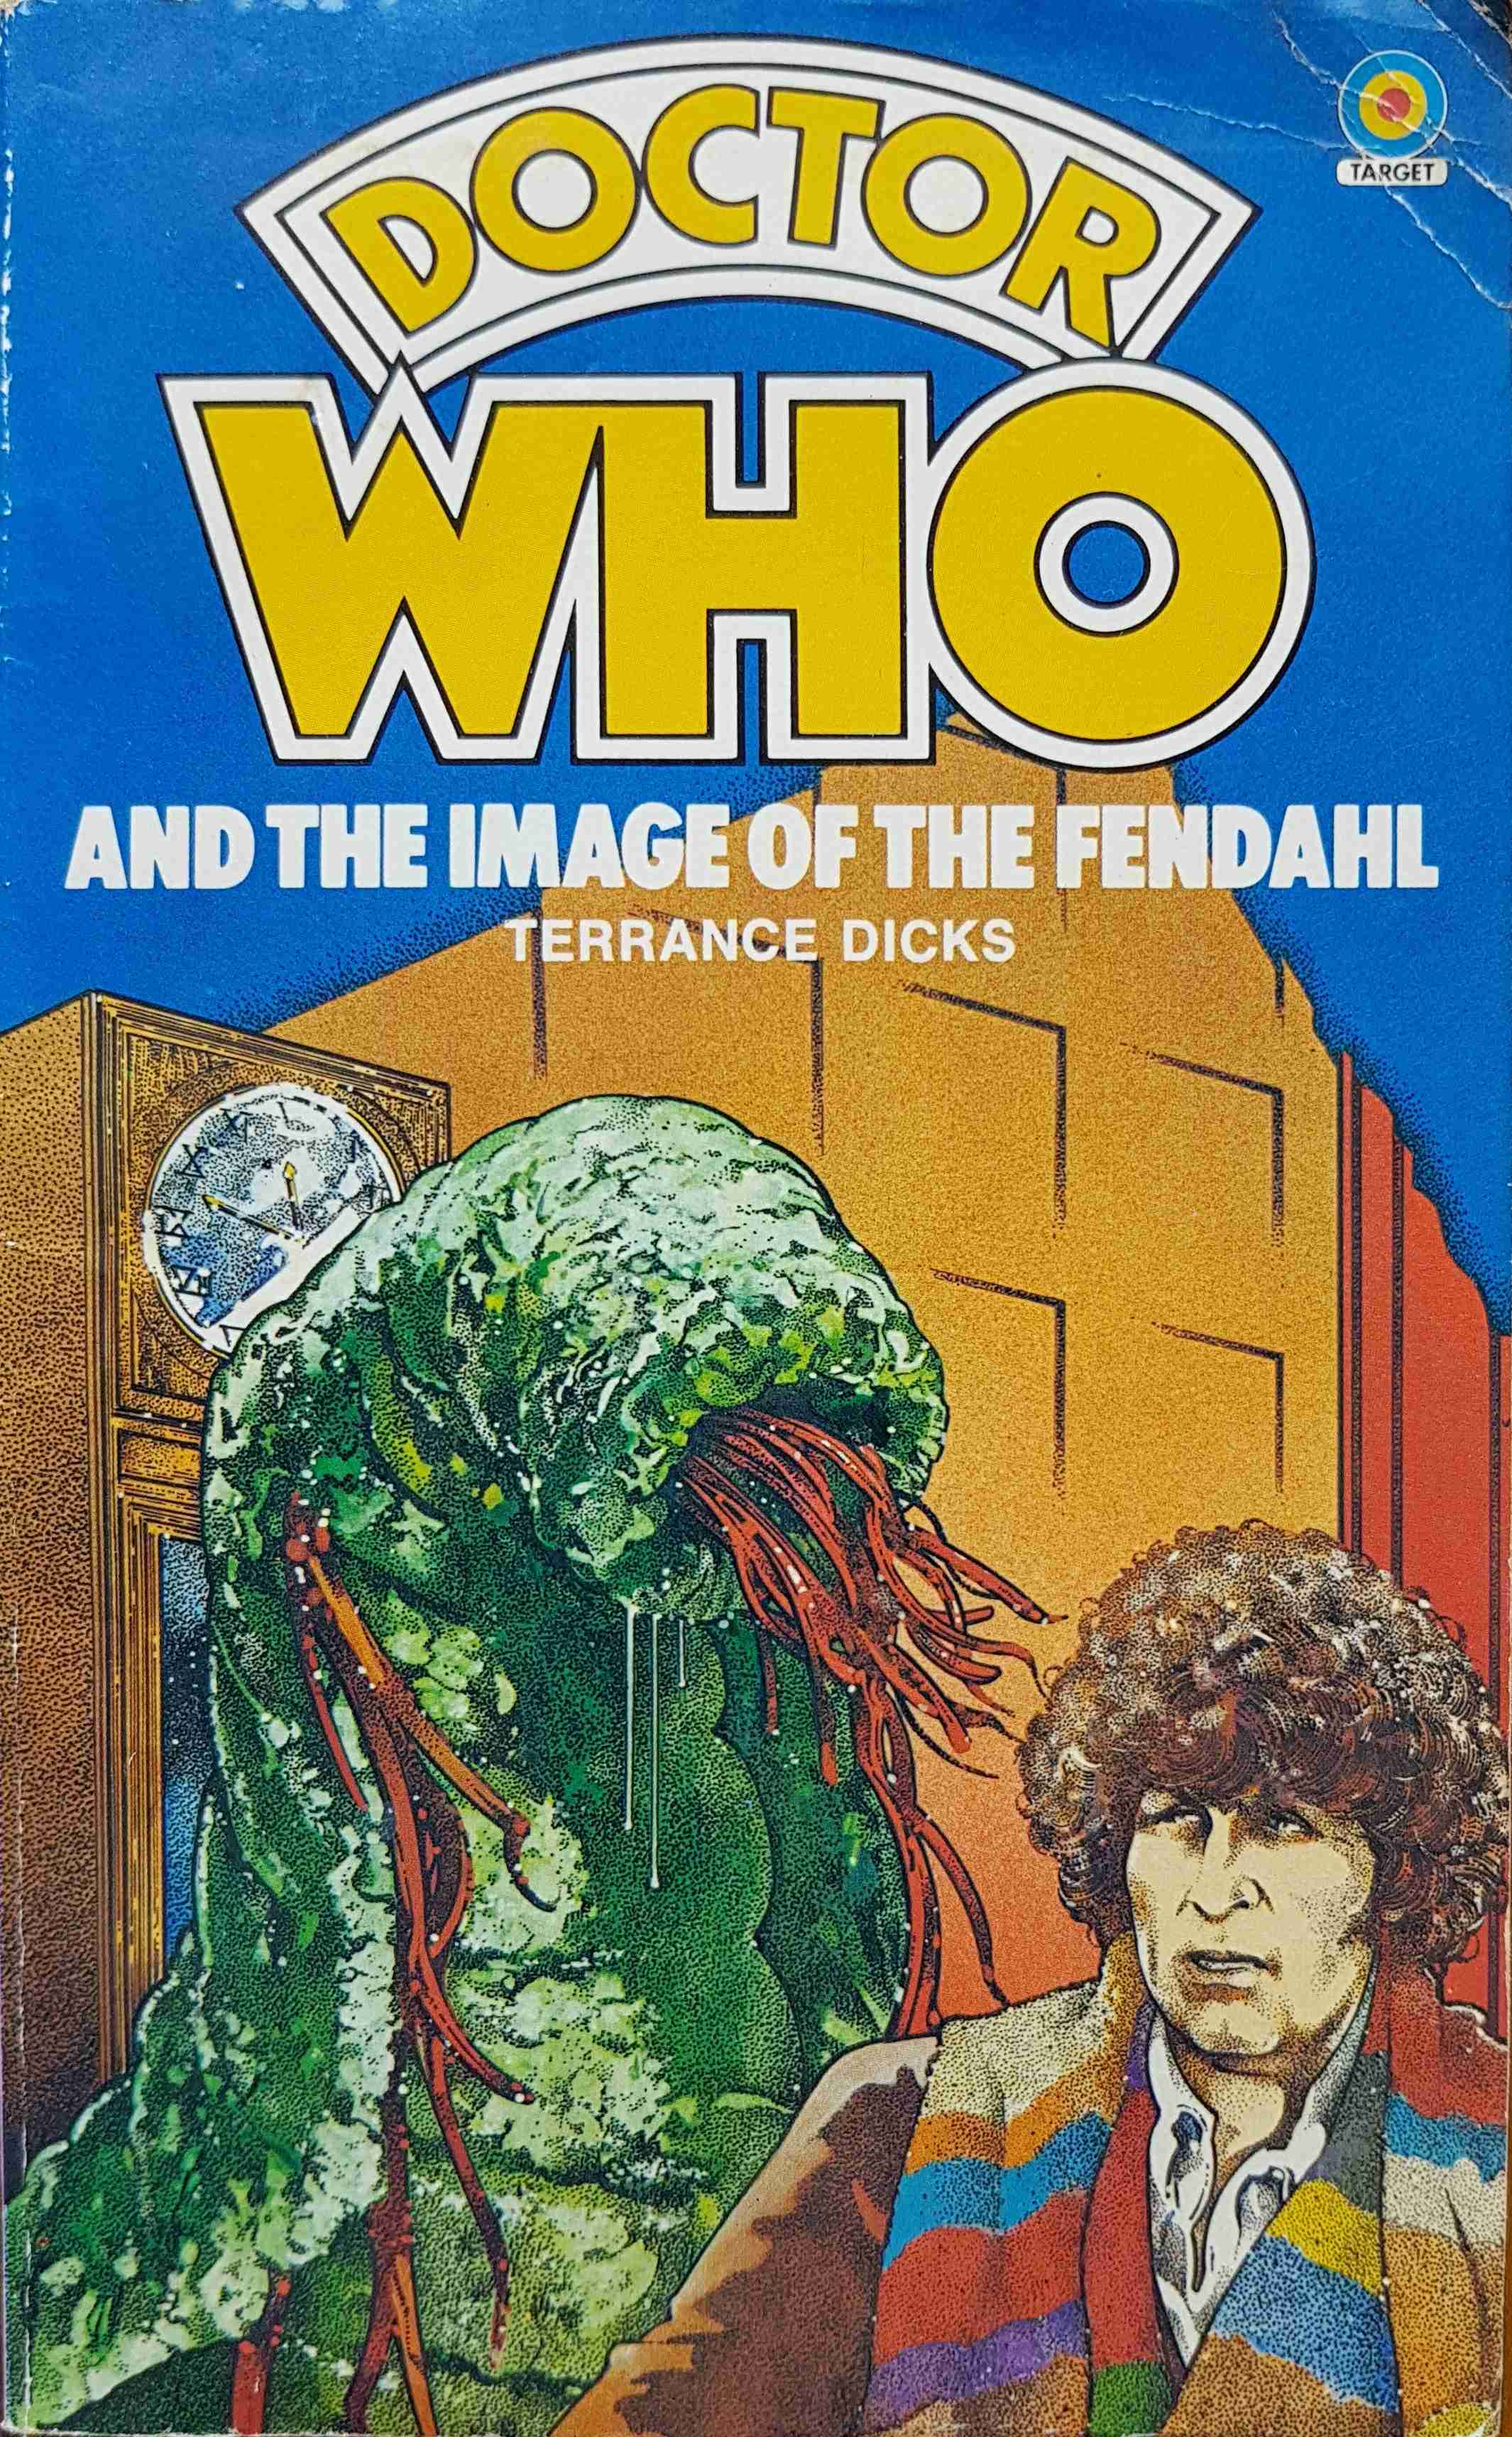 Picture of Doctor Who - Image of the Fendahl by artist Terrance Dicks from the BBC books - Records and Tapes library